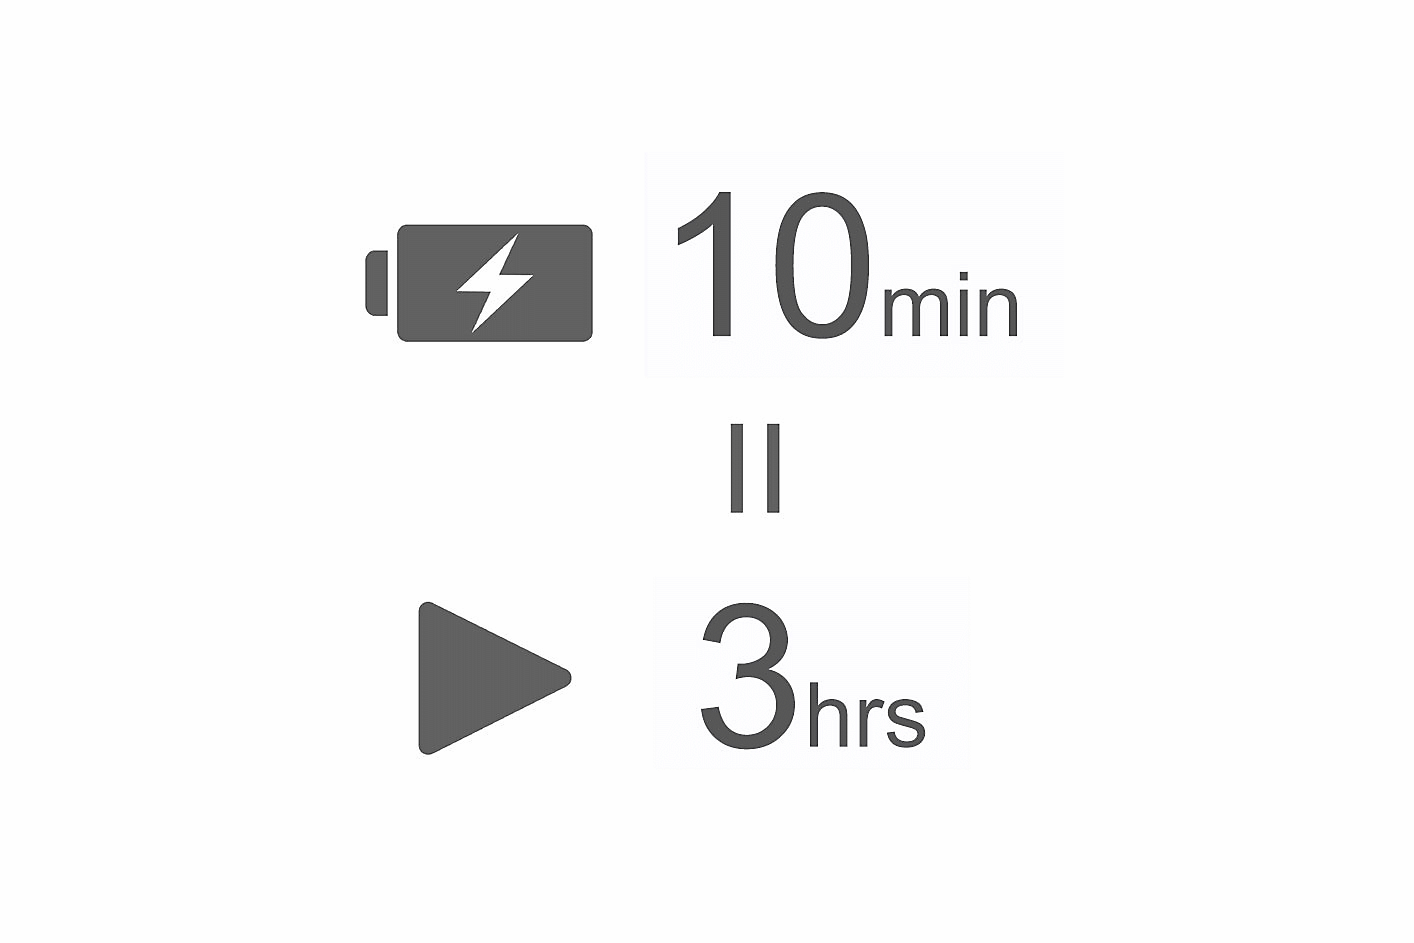 Image of a battery icon with a lightning bolt symbol on it and 10 min text above an equals sign and a play icon with 3 hrs text